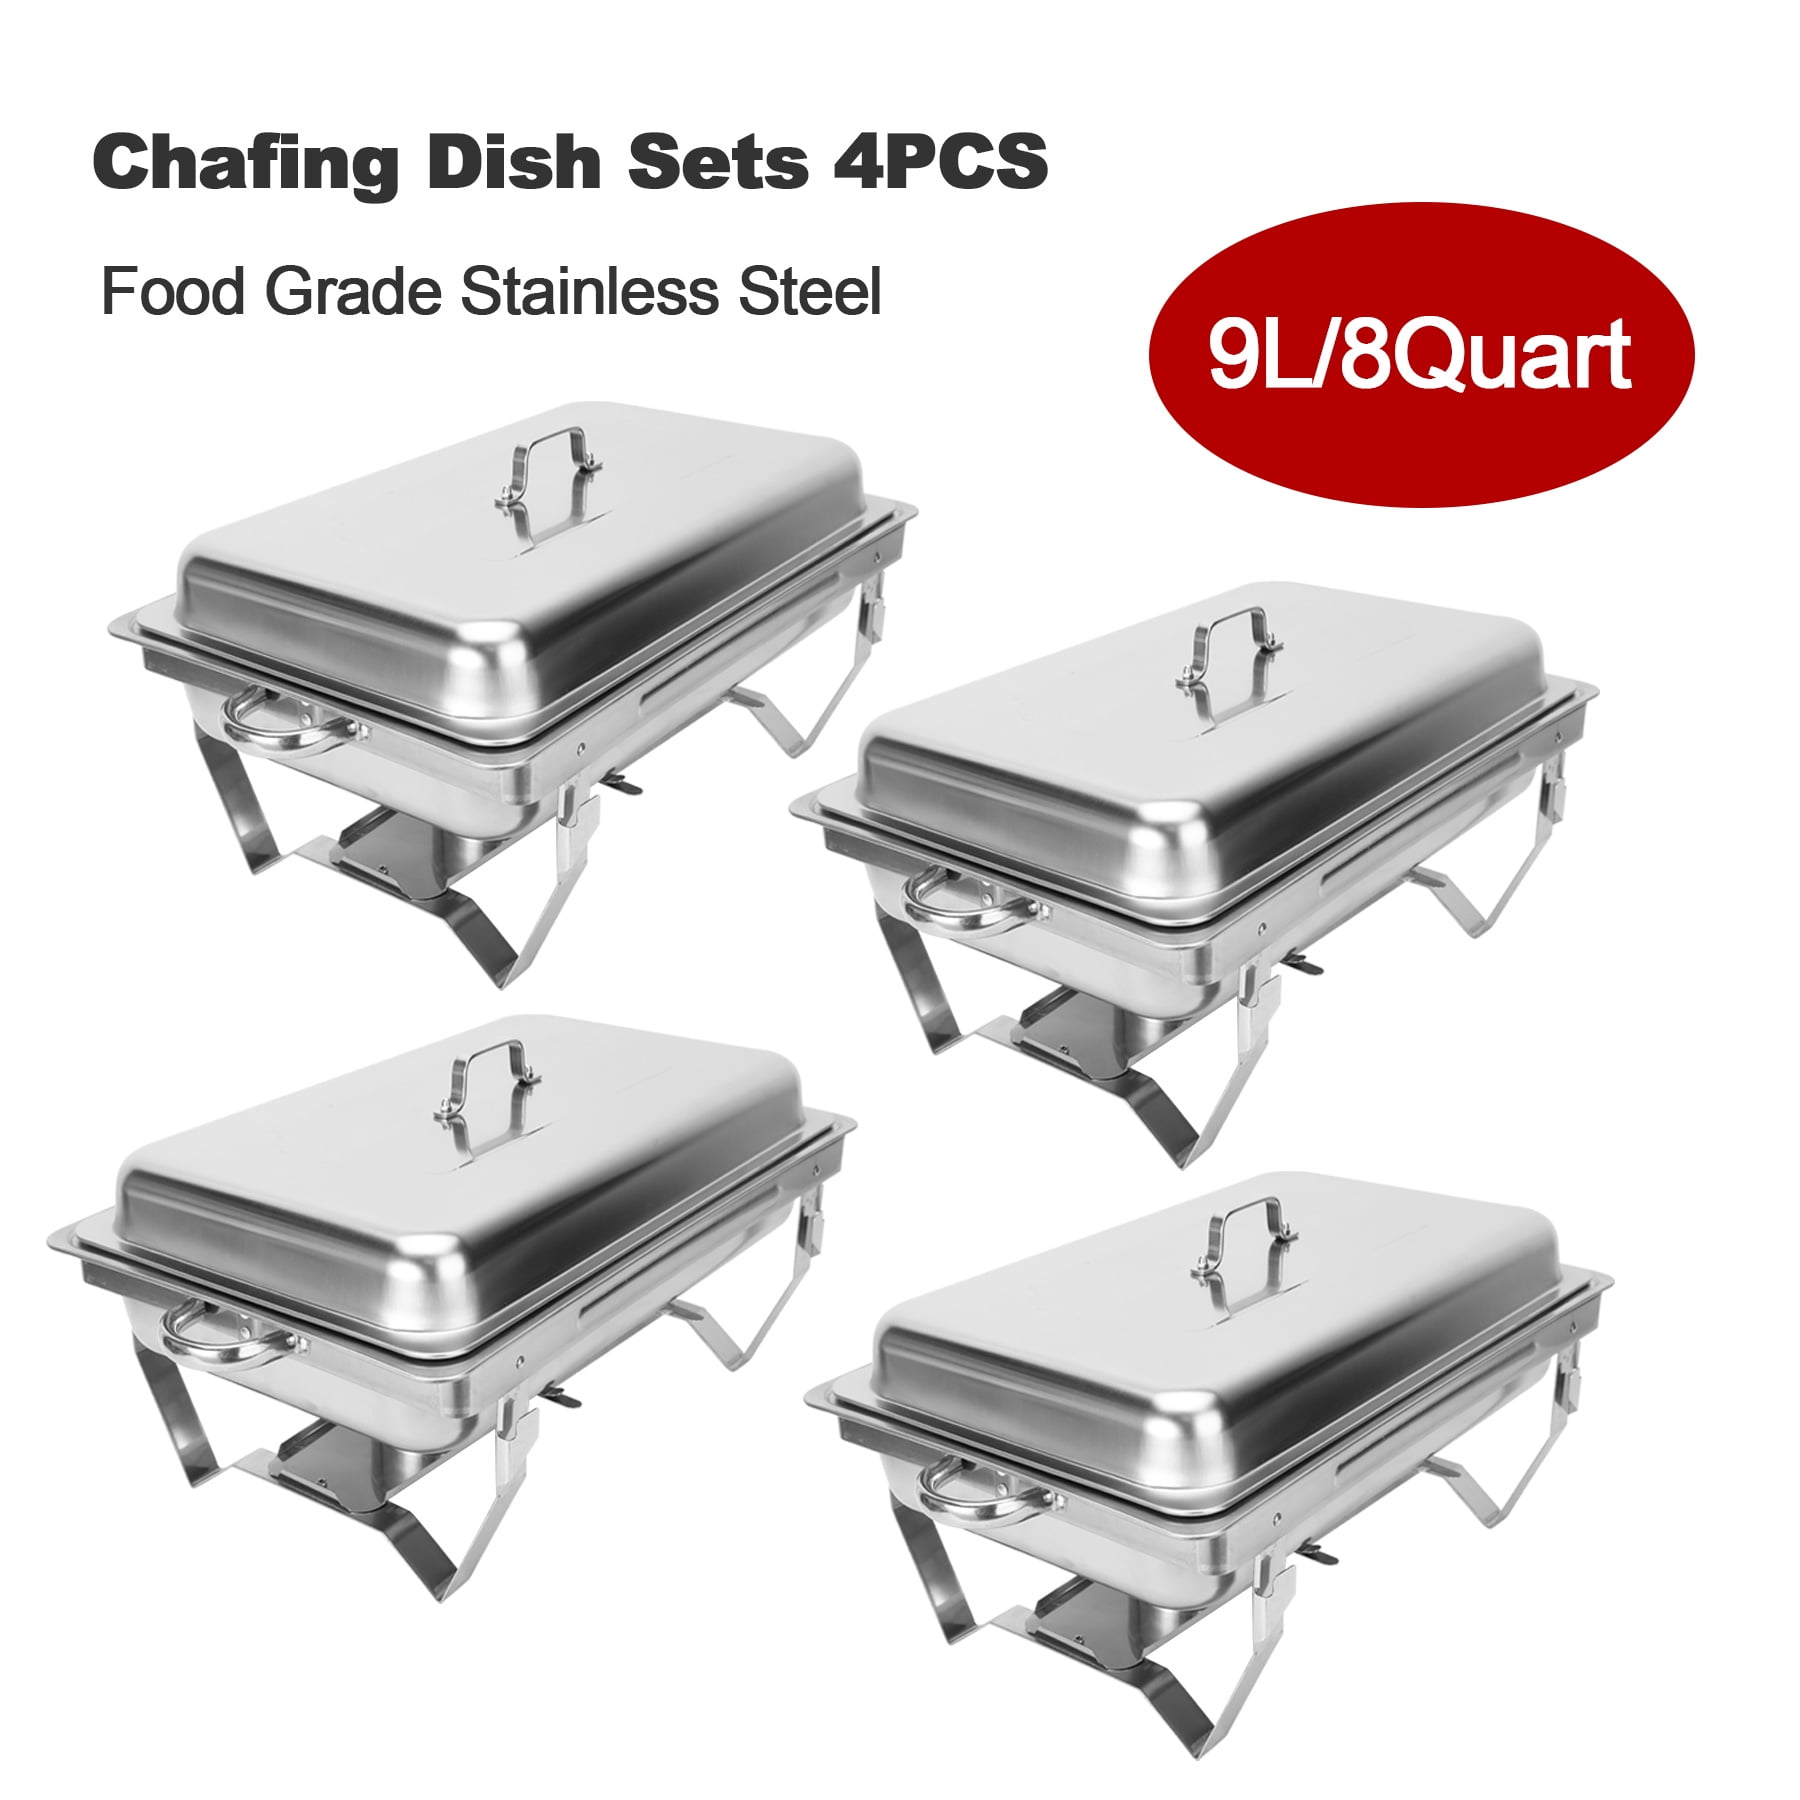 2Pack Chafer Chafing Dish Sets 9L 8Q Stainless Steel w/ Foldable Legs Trays